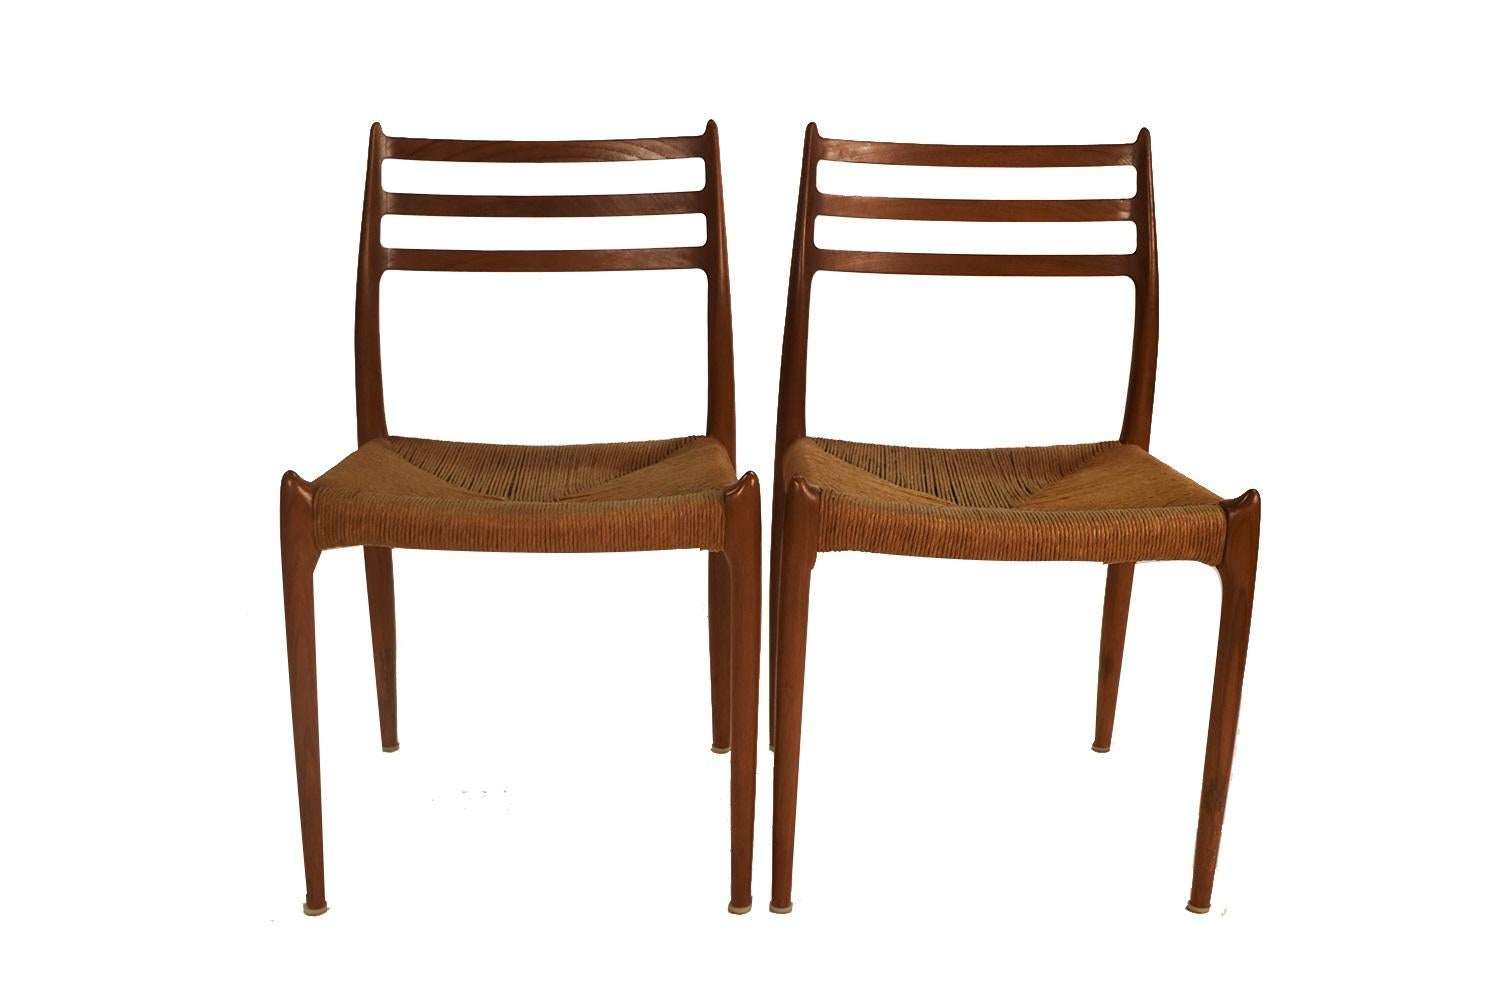 An absolutely stunning pair of Mid-Century Danish Modern  chairs model 78 designed in 1962 by Niels Otto Moller for J.L. Møllers Møbelfabrik in Denmark. These gorgeous chairs feature beautifully sculpted teak frames and exquisite original woven